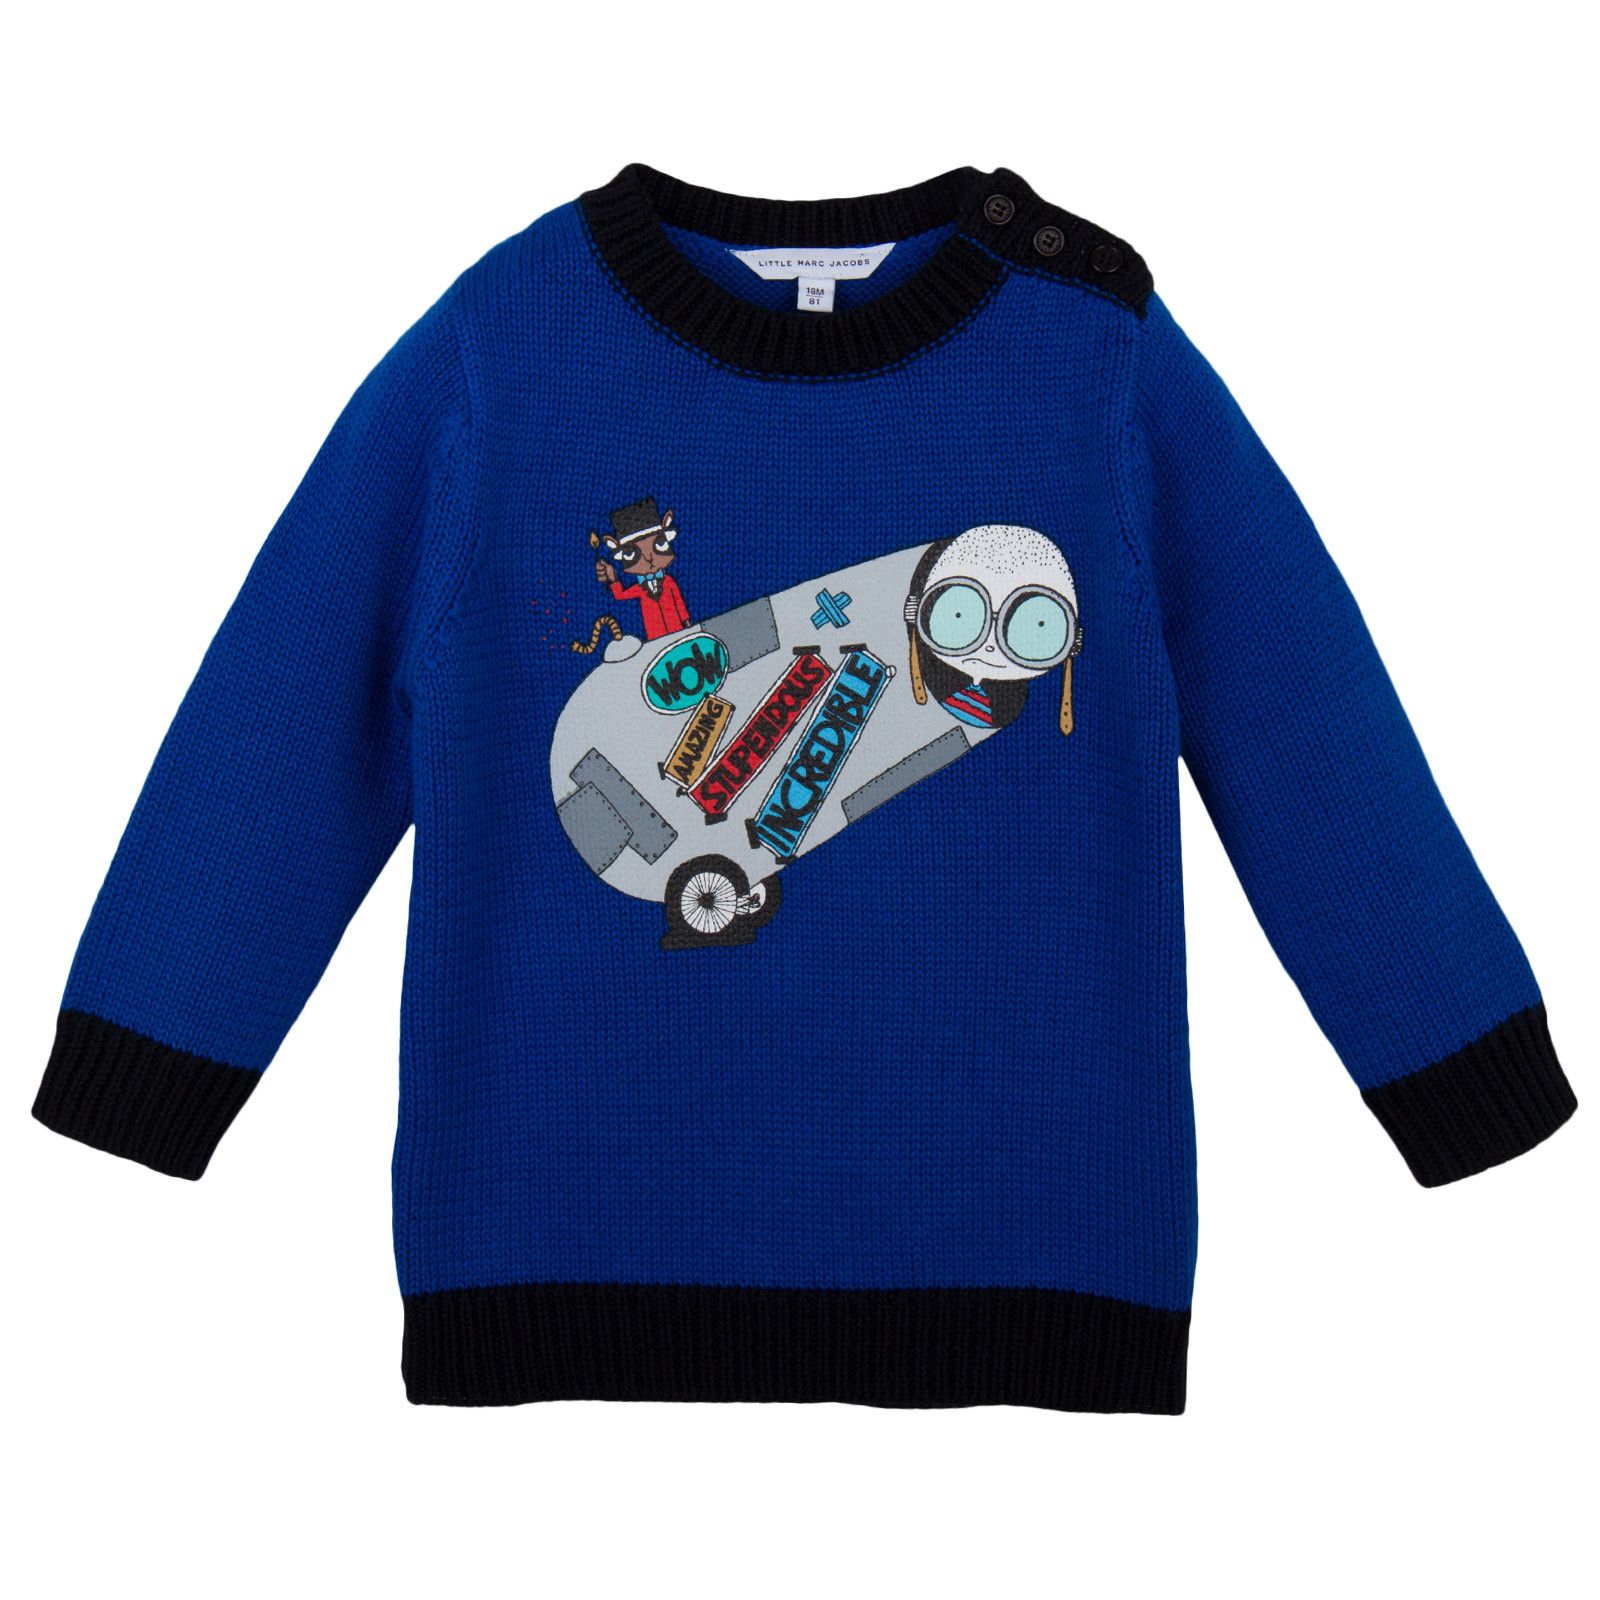 Baby Boys Blue 'Mr Marc' Knitted Sweater - CÉMAROSE | Children's Fashion Store - 1